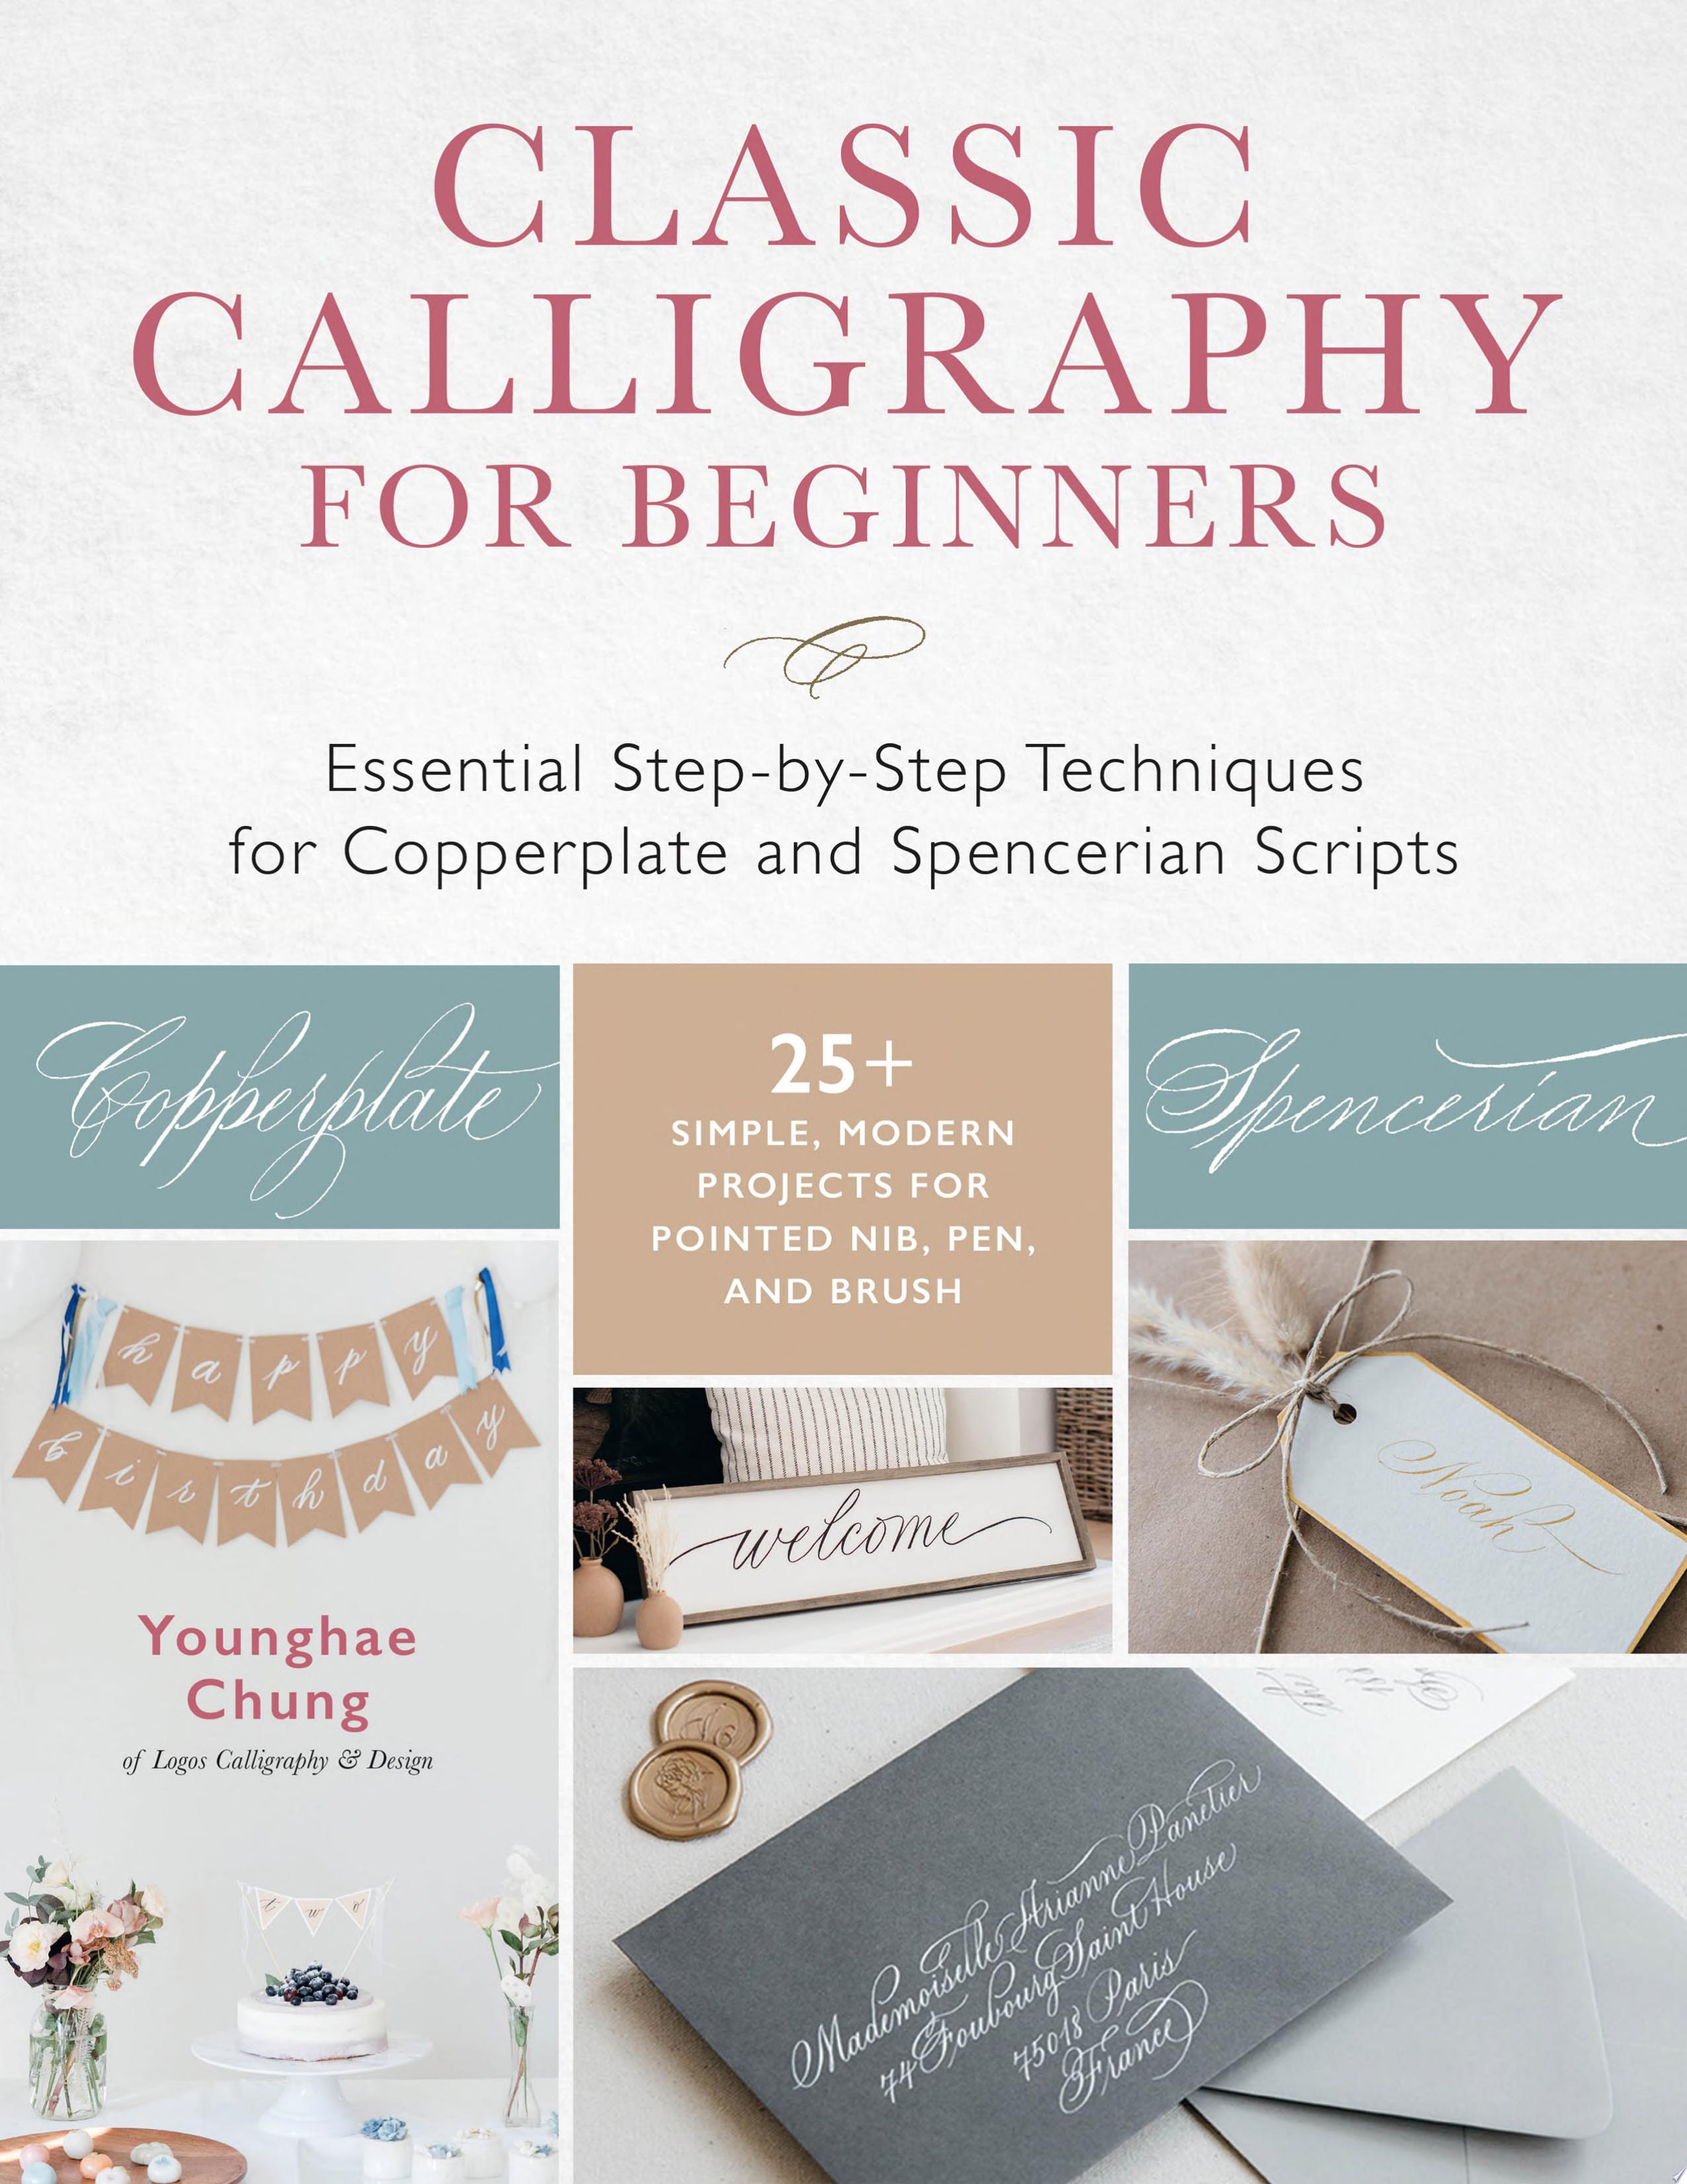 Image for "Classic Calligraphy for Beginners"